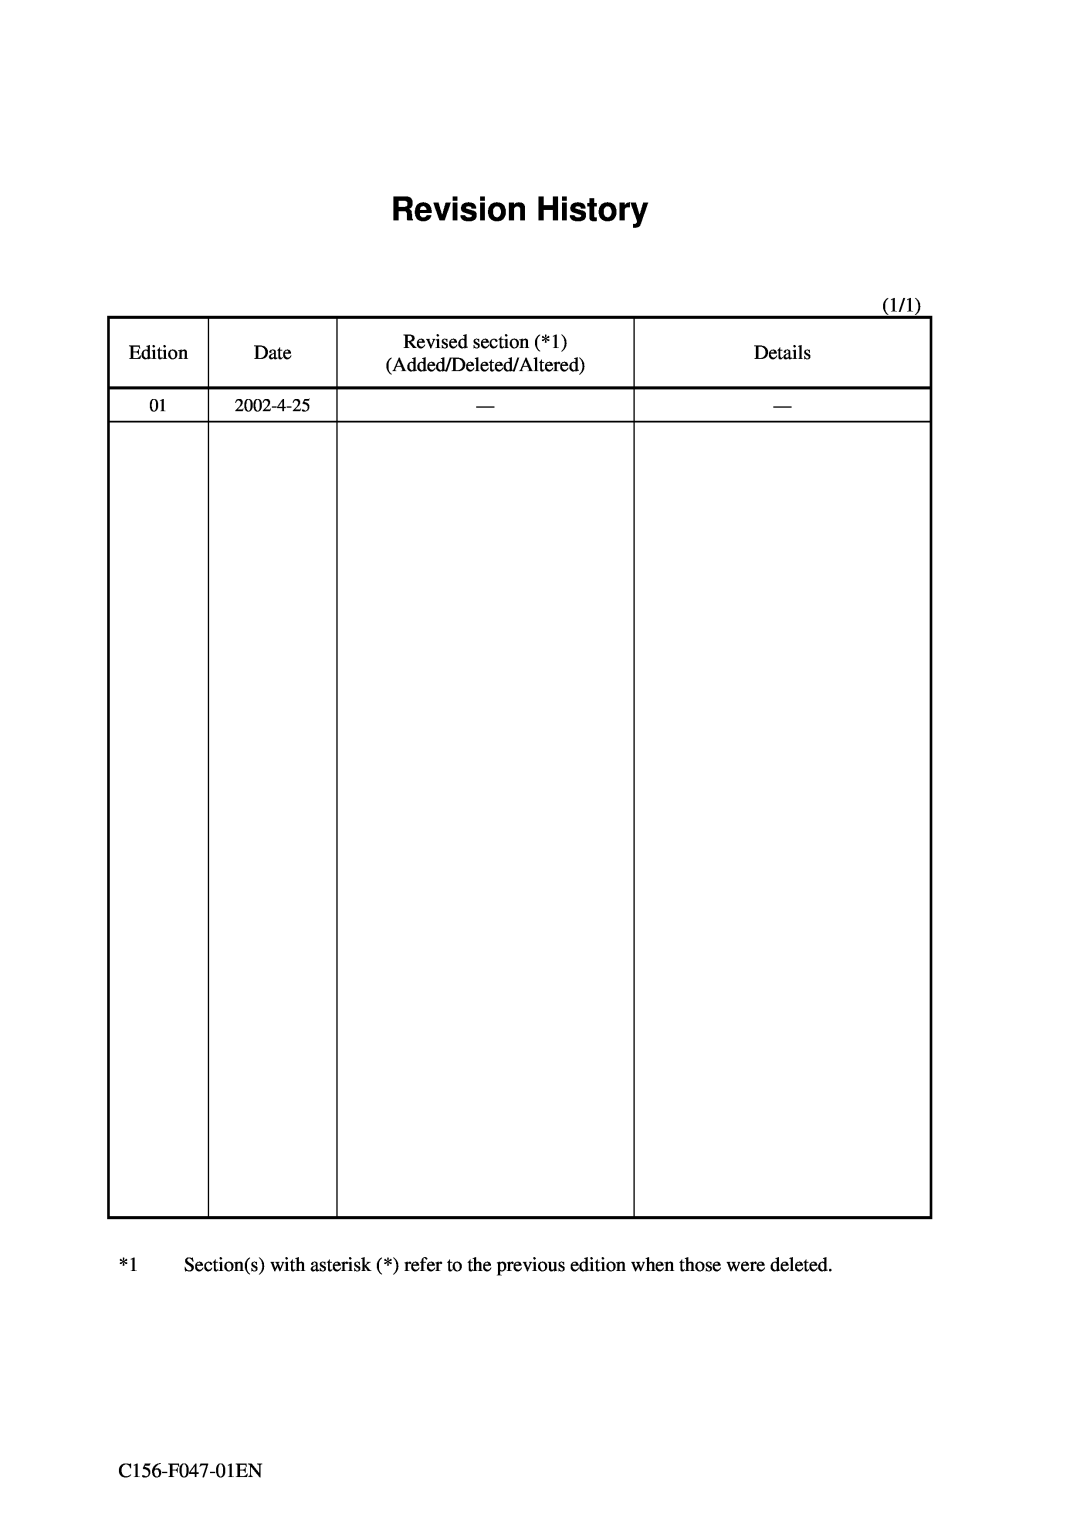 Fujitsu MDG3230UB Revision History, Edition, Date, Revised section *1, Details, Added/Deleted/Altered, C156-F047-01EN 